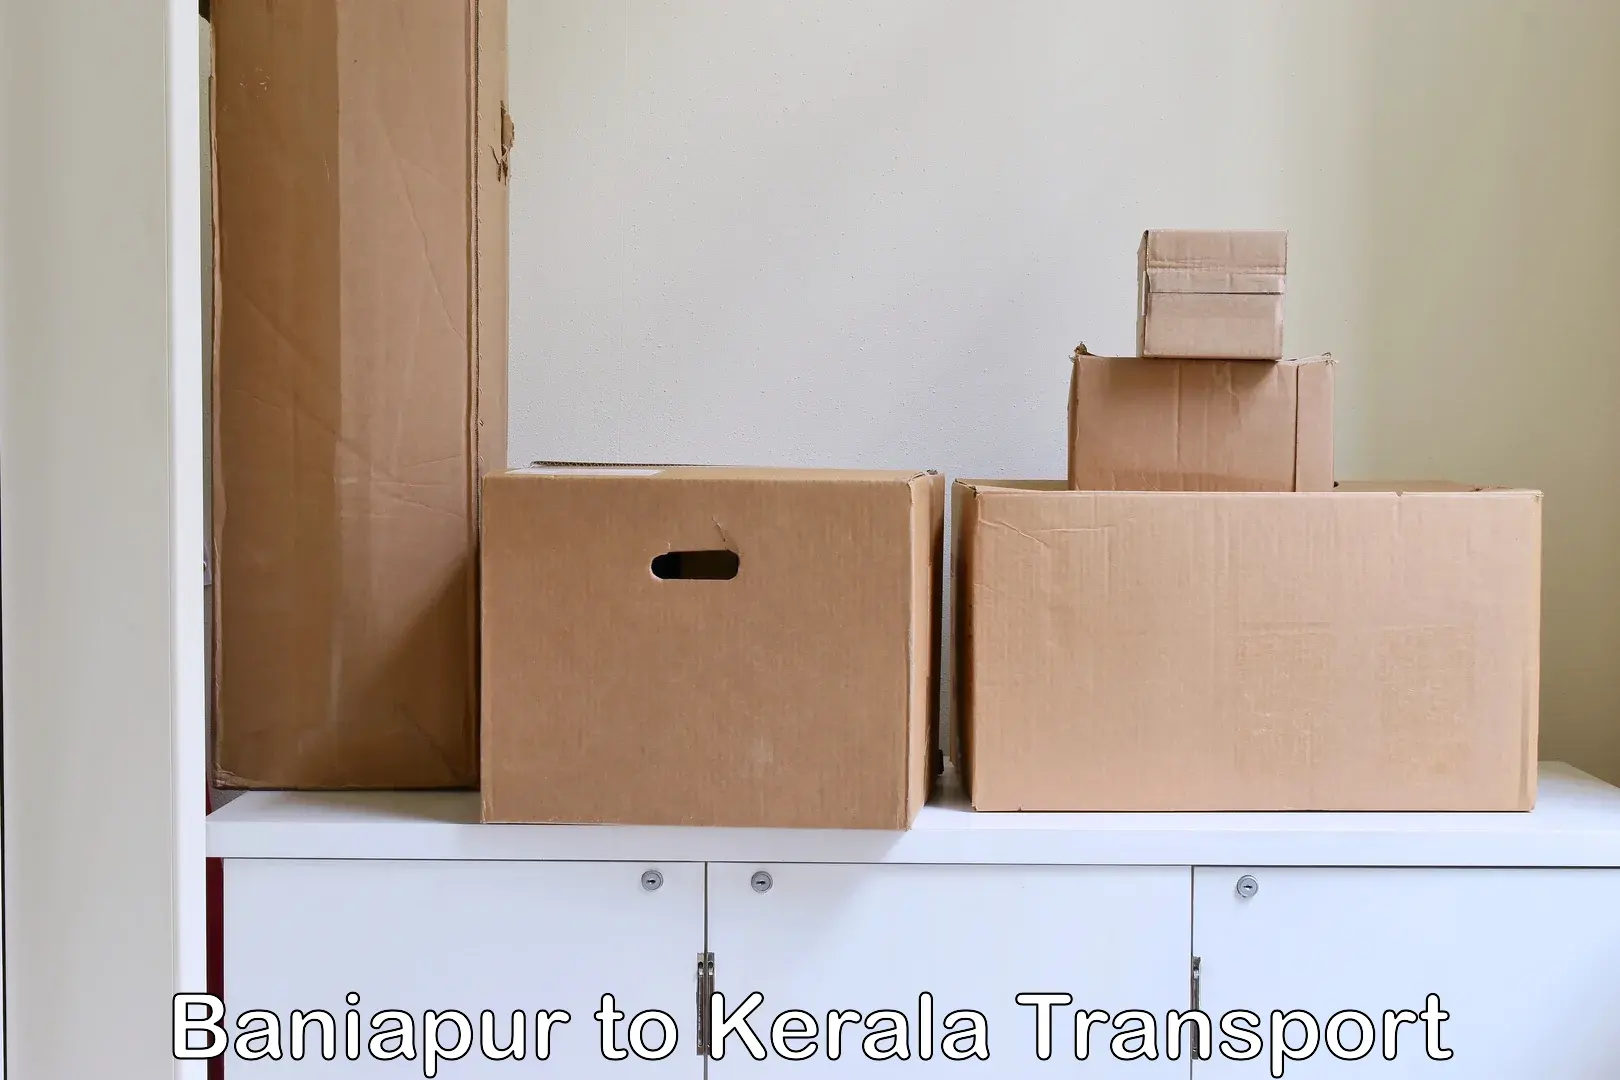 Air freight transport services Baniapur to Ernakulam